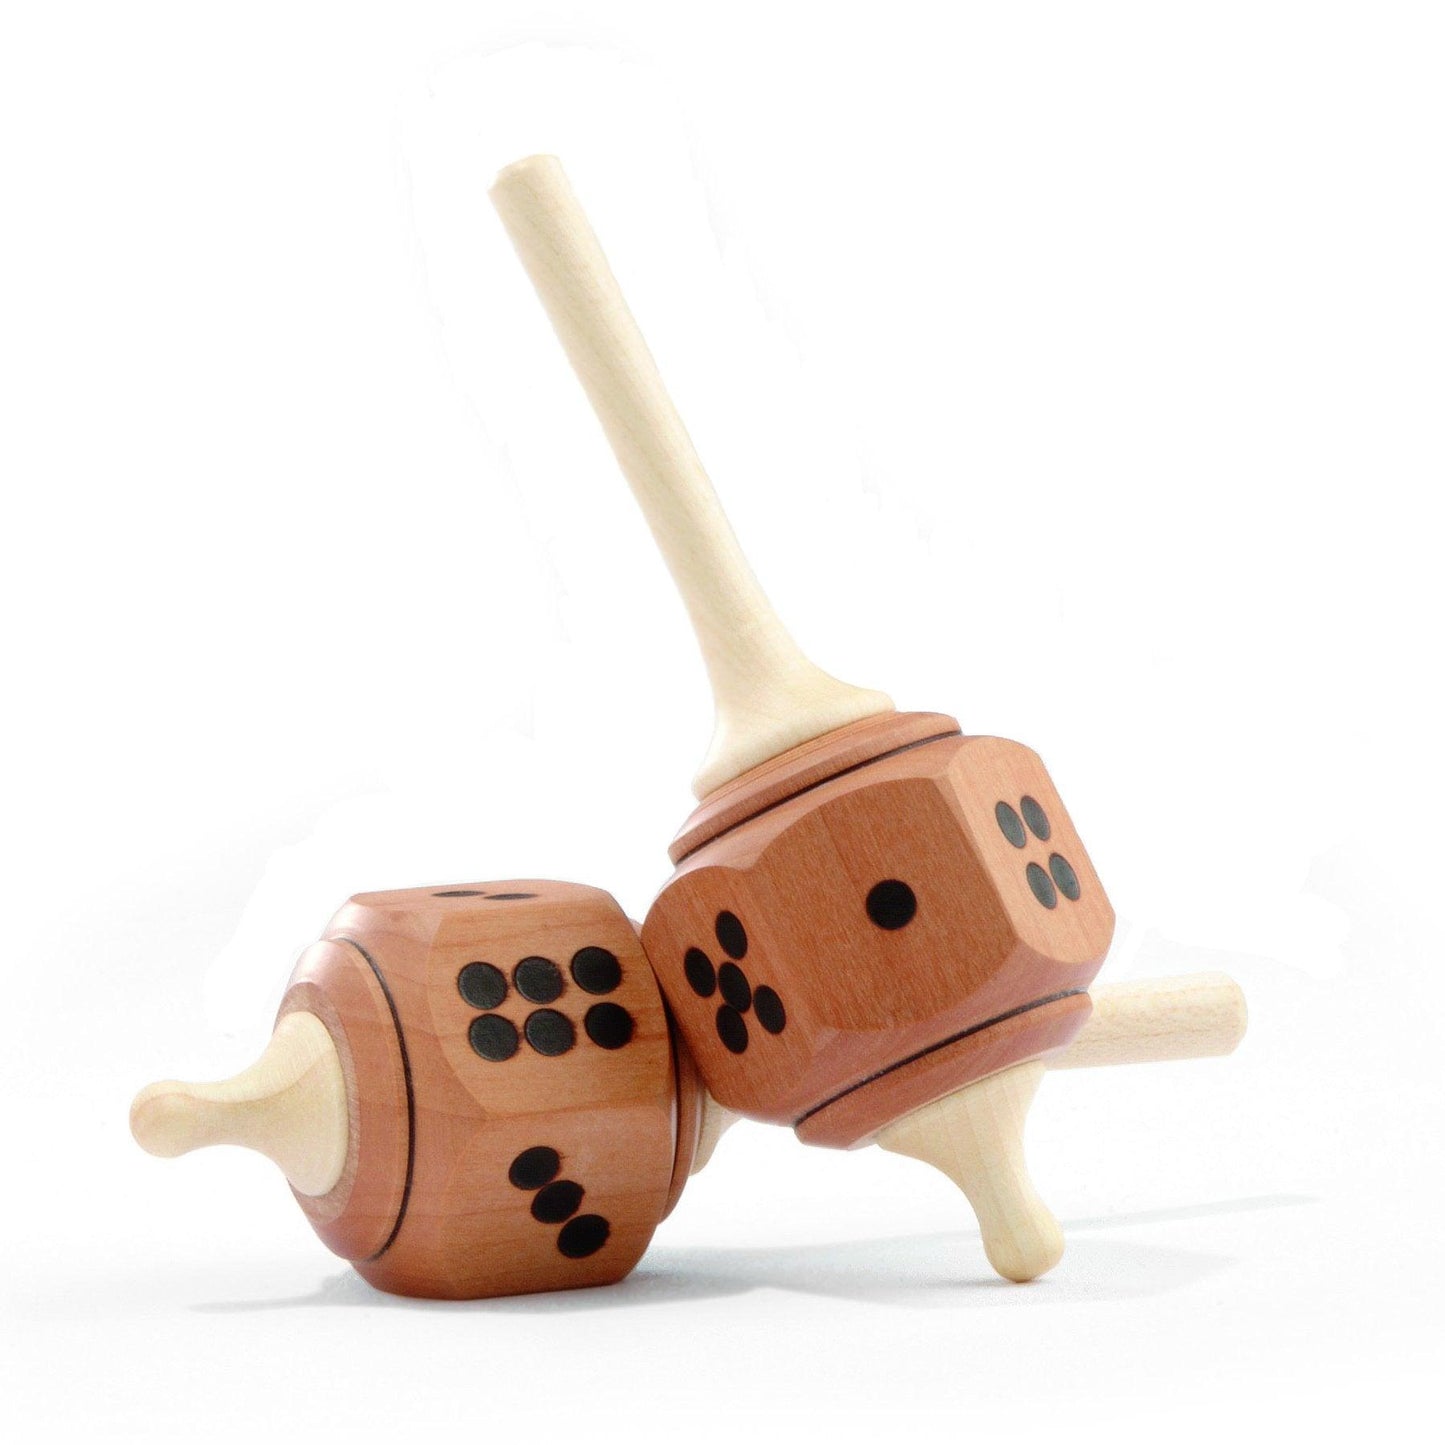 Mader Dual-Function Dice & Spinning Top